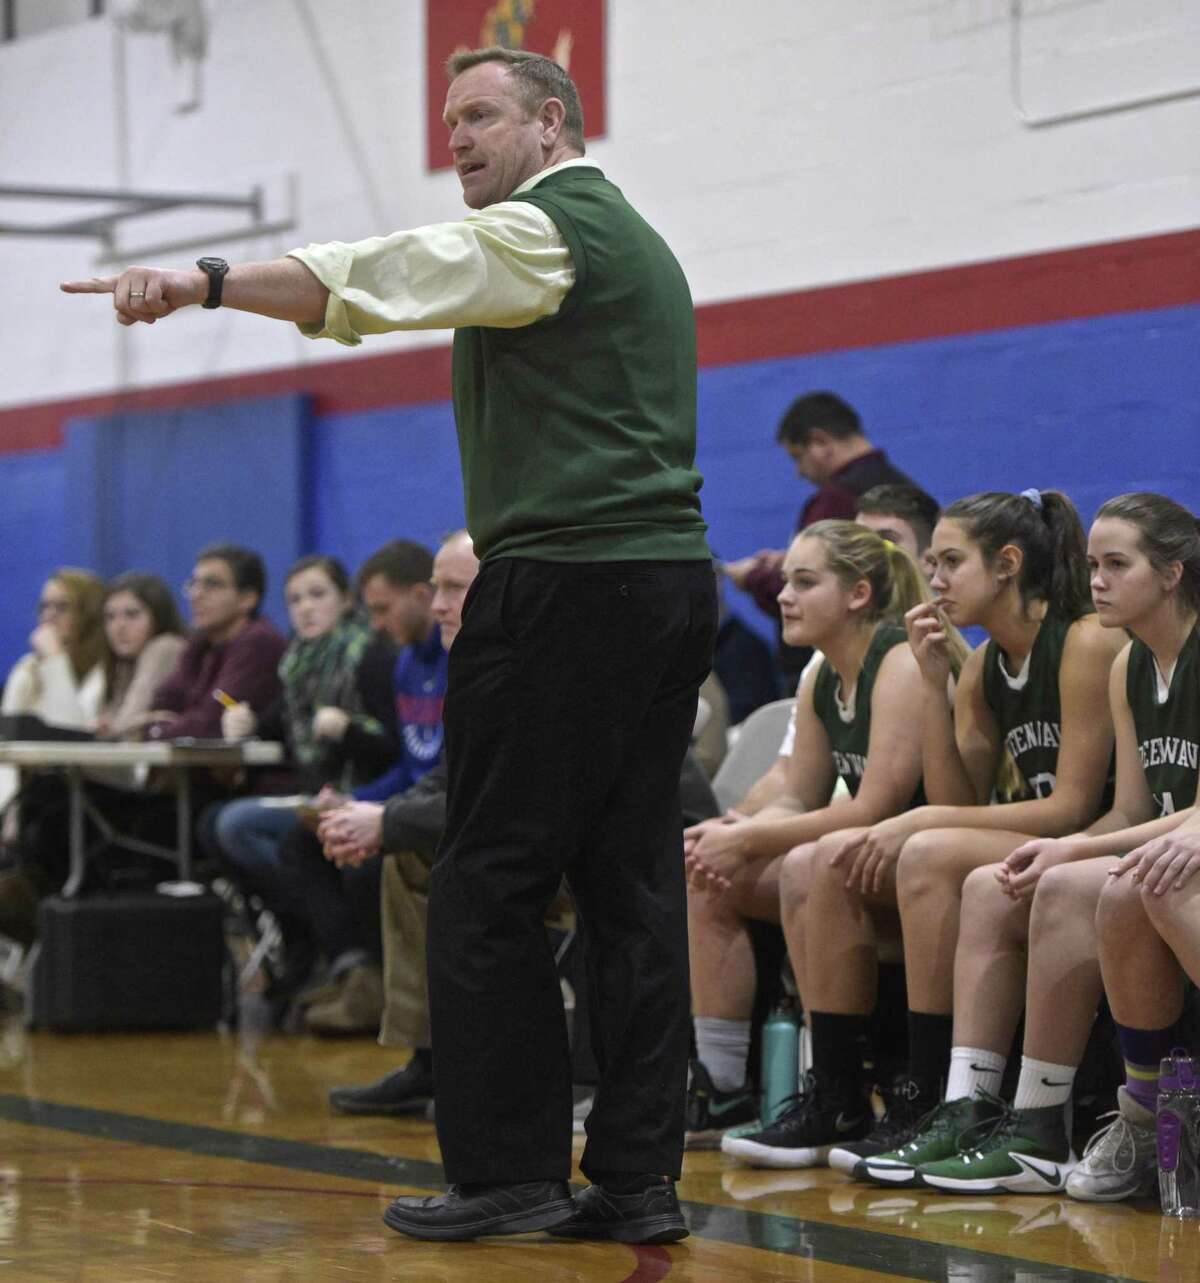 New Milford head coach Bill Kersten talks with a player during the consolation game of the 13th Annual The News-Times Greater Danbury Holiday Festival girls high school basketball tournament. Thursday, December 28, 2017, at the Danbury War Memorial, in Danbury, Conn.